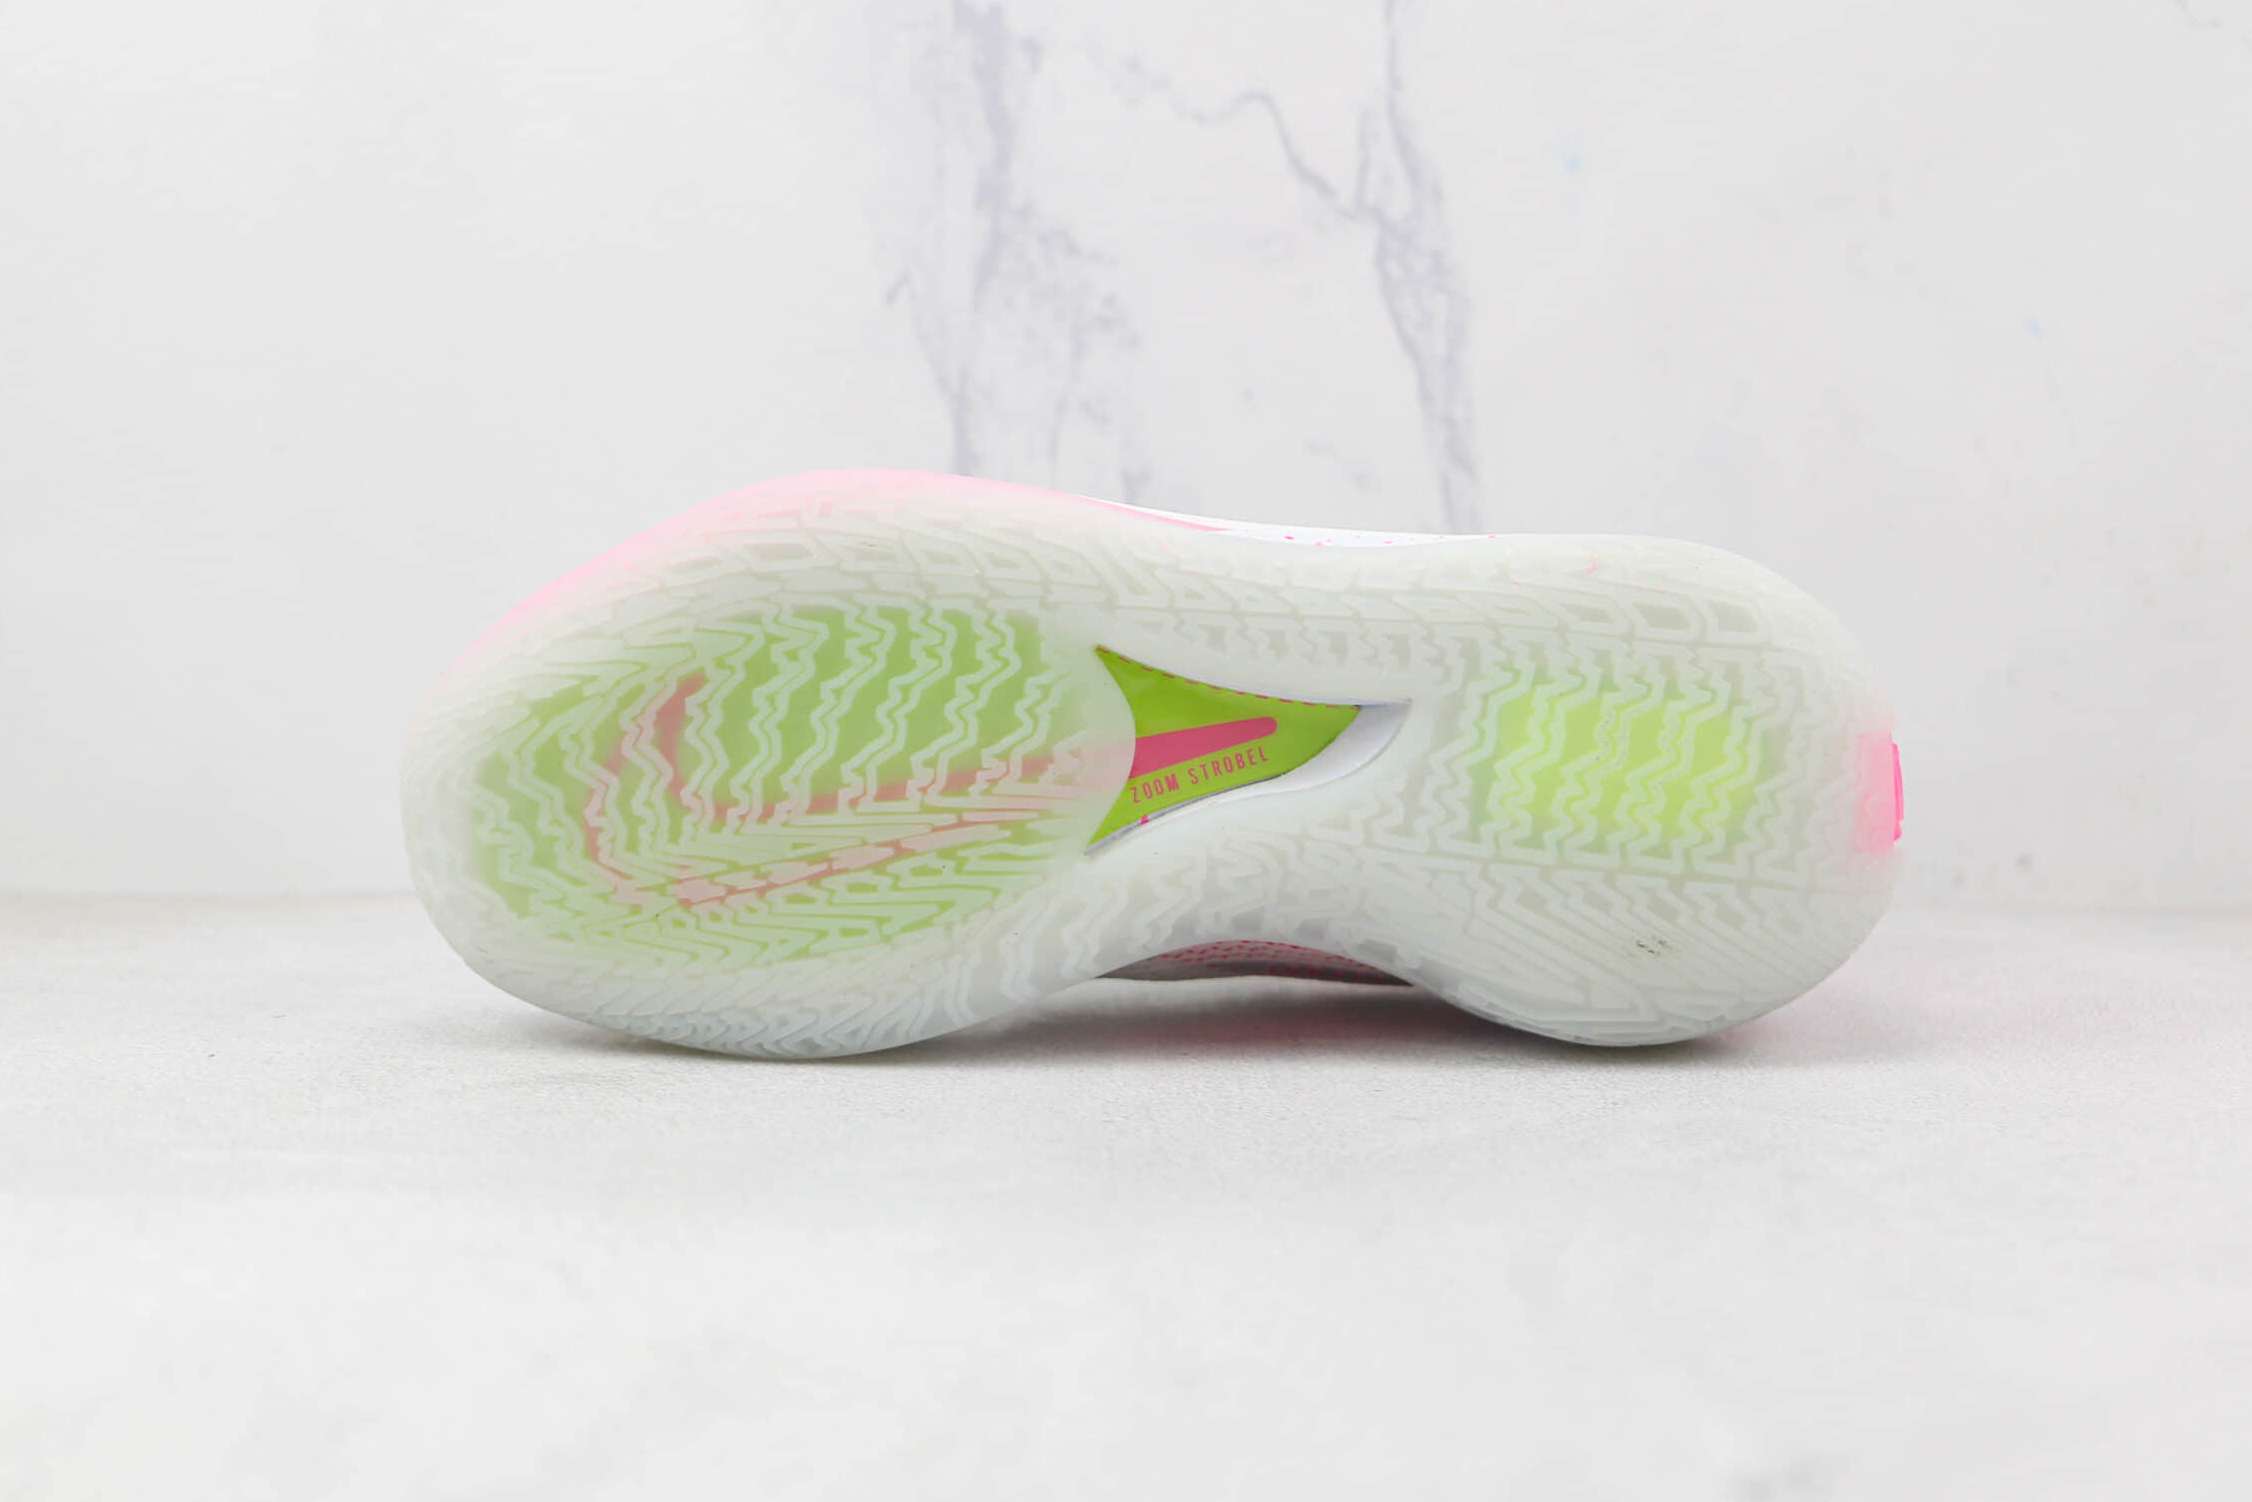 Nike Air Zoom GT Cut 'Pure Platinum Pink Blast' CZ0175-008 - Superior performance and style in this vibrant sneaker.